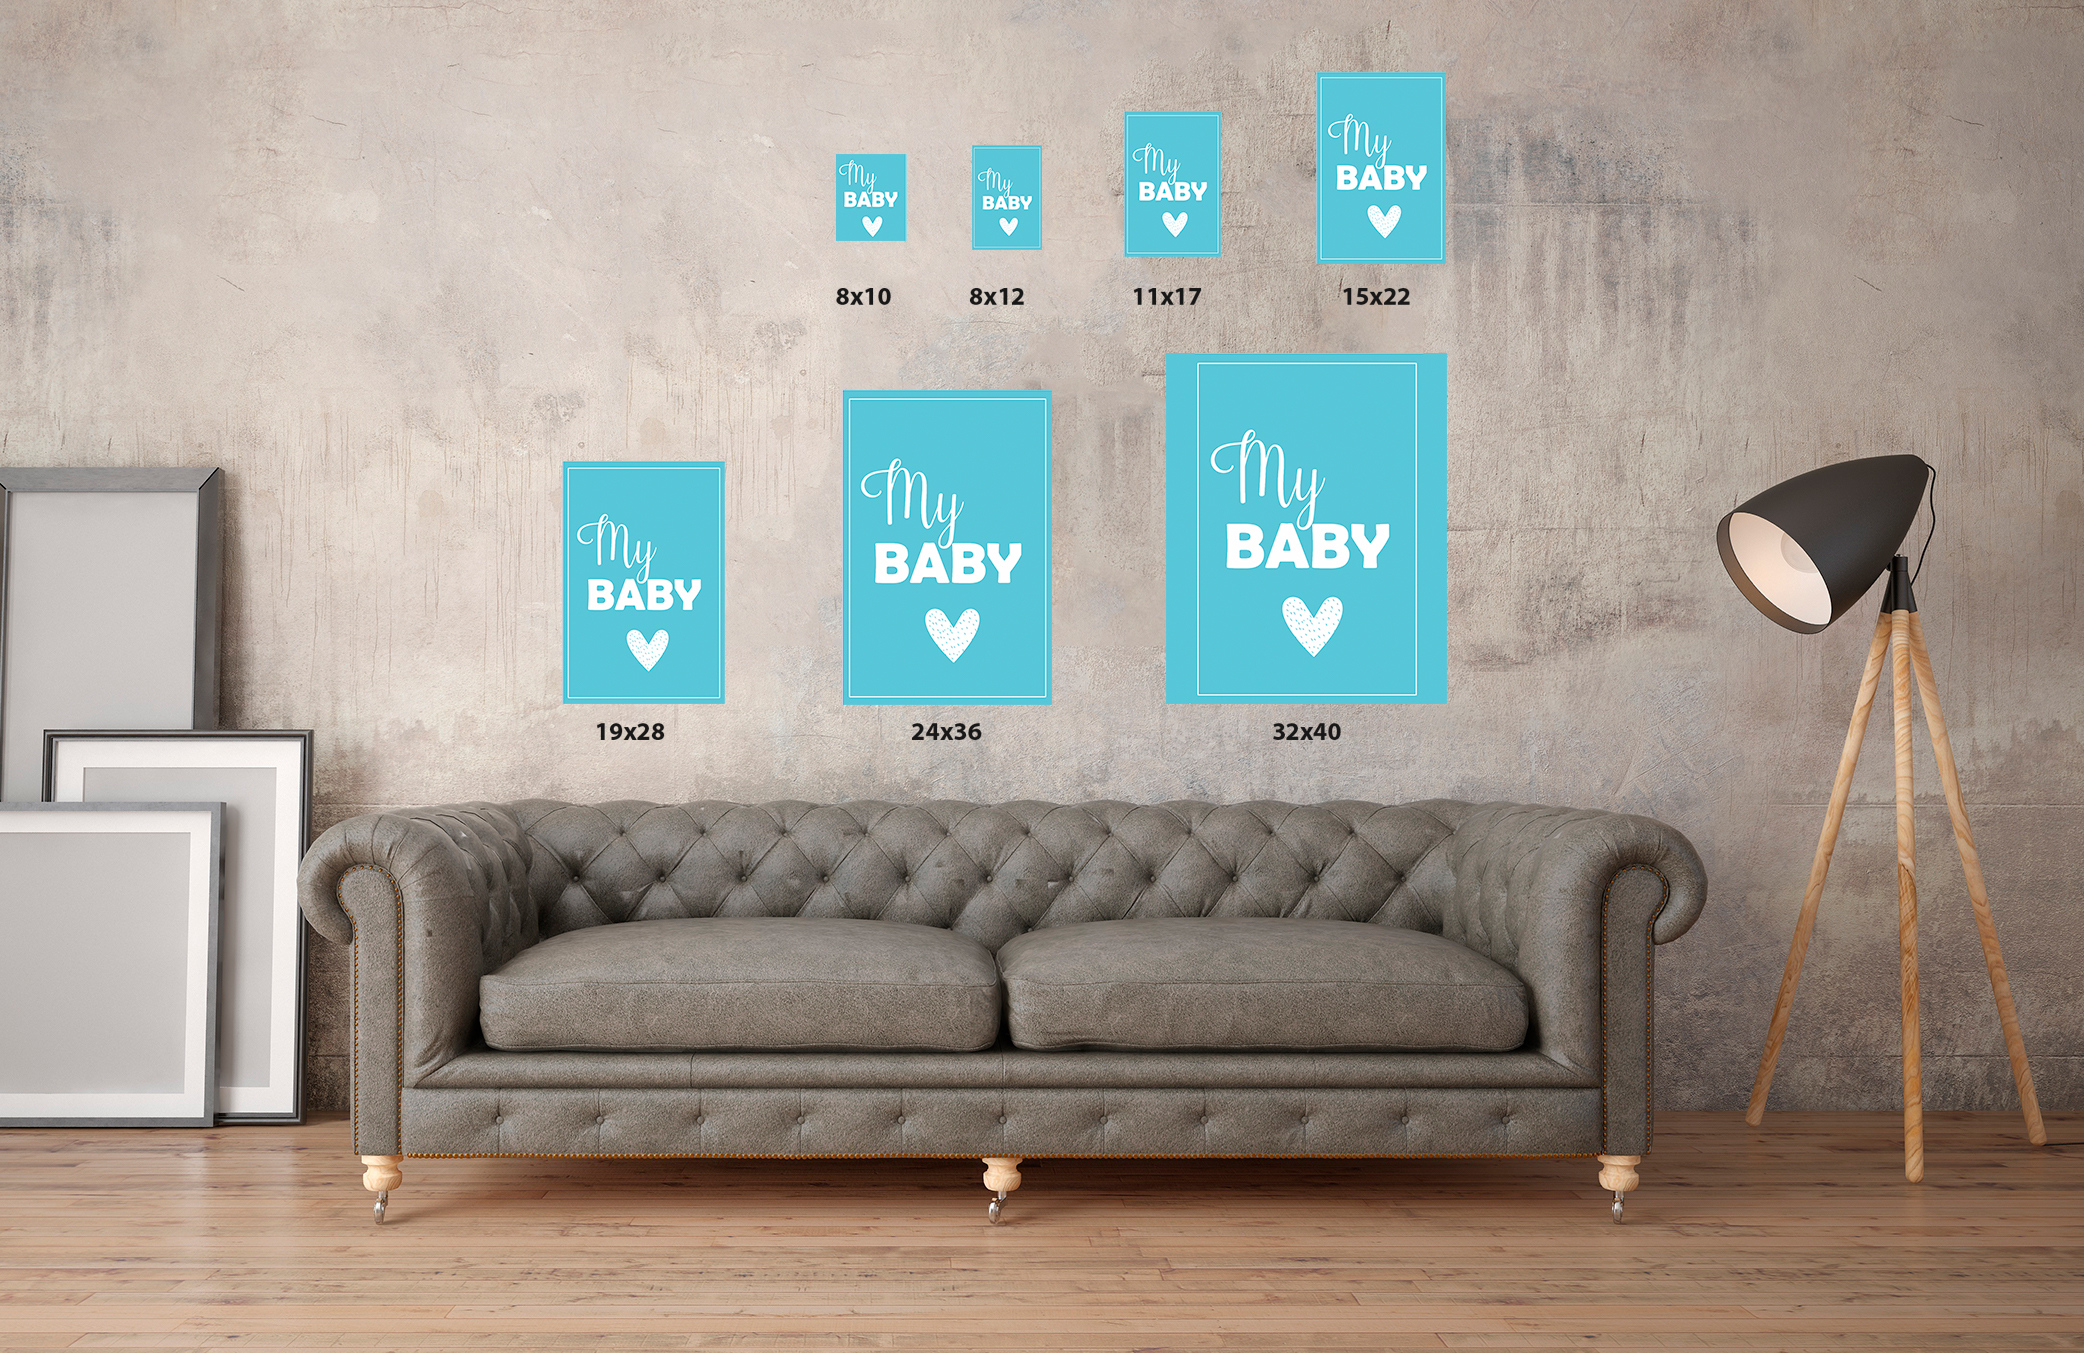 Awkward Styles My Baby Poster Wall Art Kids Room Wall Decor Blue Poster Baby Room Decor Gifts for Kids Baby Boys Room Printed Art Picture Newborn Baby Room Poster Wall Decor Mother Quotes Poster Art - image 3 of 3